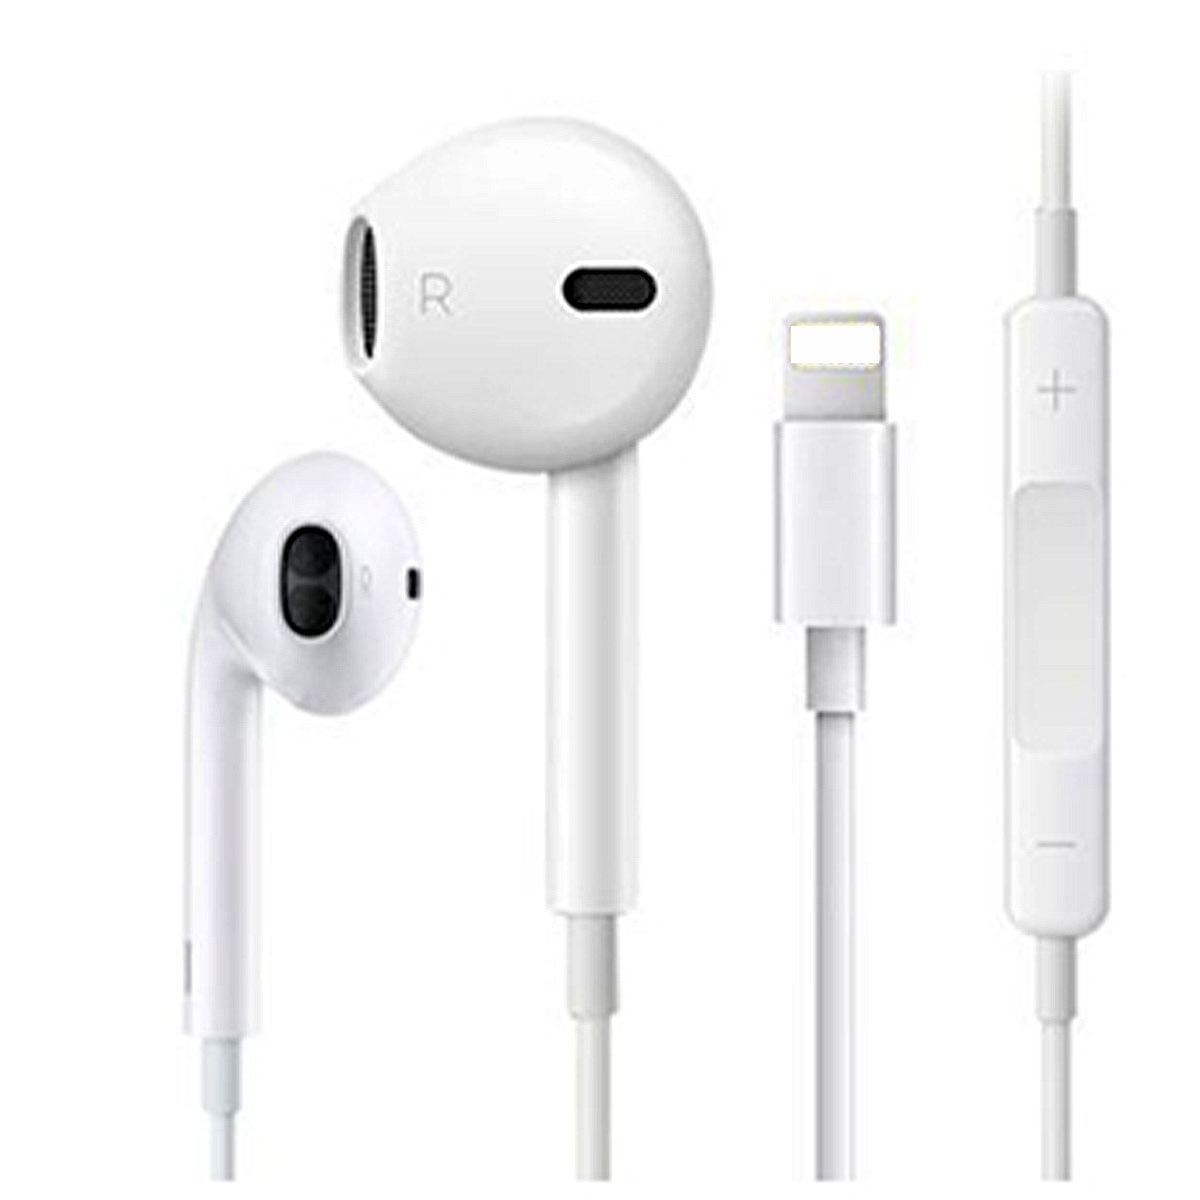 Bluetooth Headset Wireless Ear Pods Earphones For iPhone7 8 Plus X XS Android